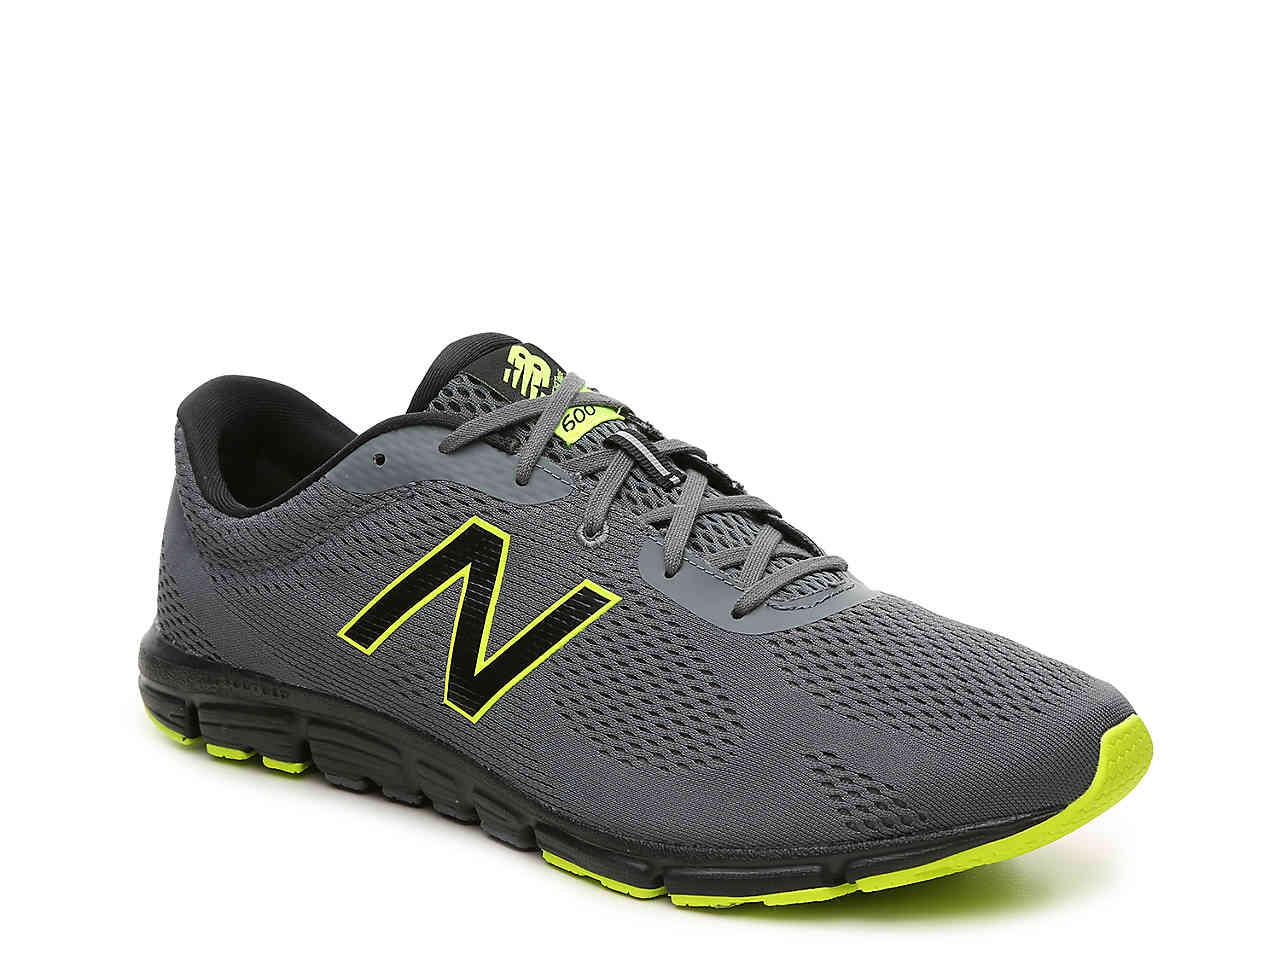 New Balance Synthetic 600 V2 new balance 600 series shoes